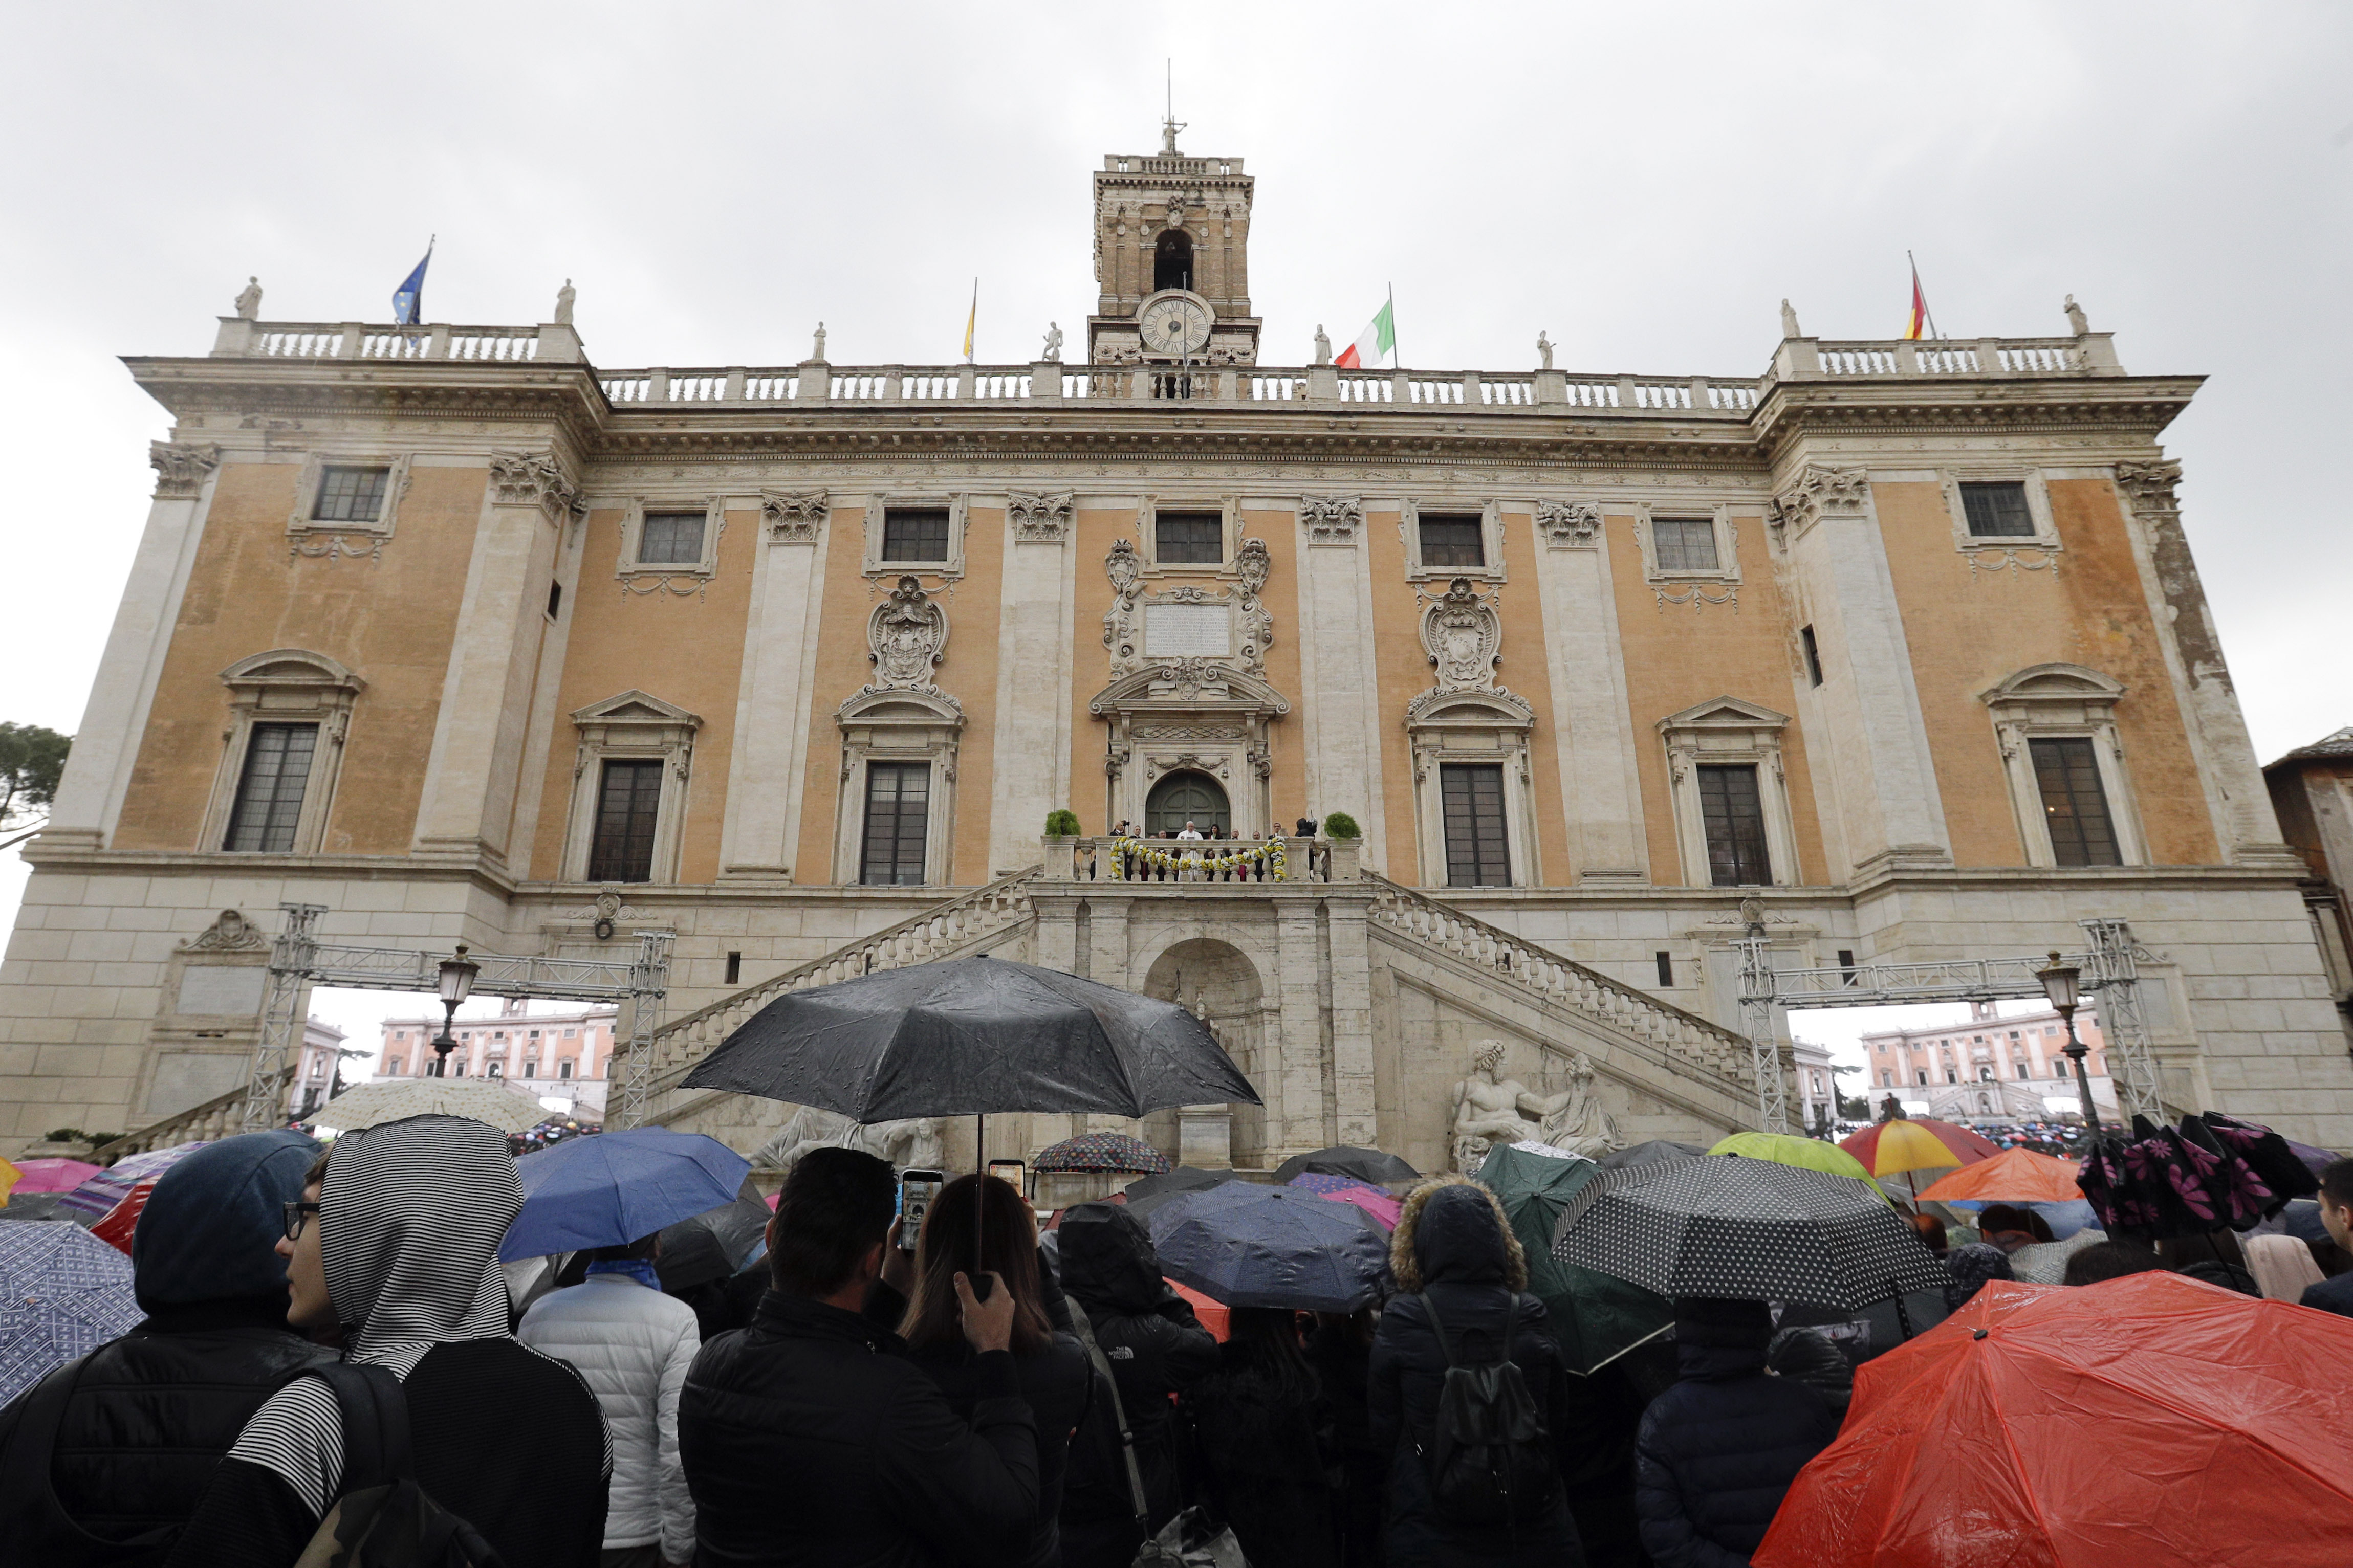 Pope Francis, background center, delivers his speech during his visit to the Campidoglio, Capitol hill, in Rome, March 26, 2019. (AP Photo/Gregorio Borgia)